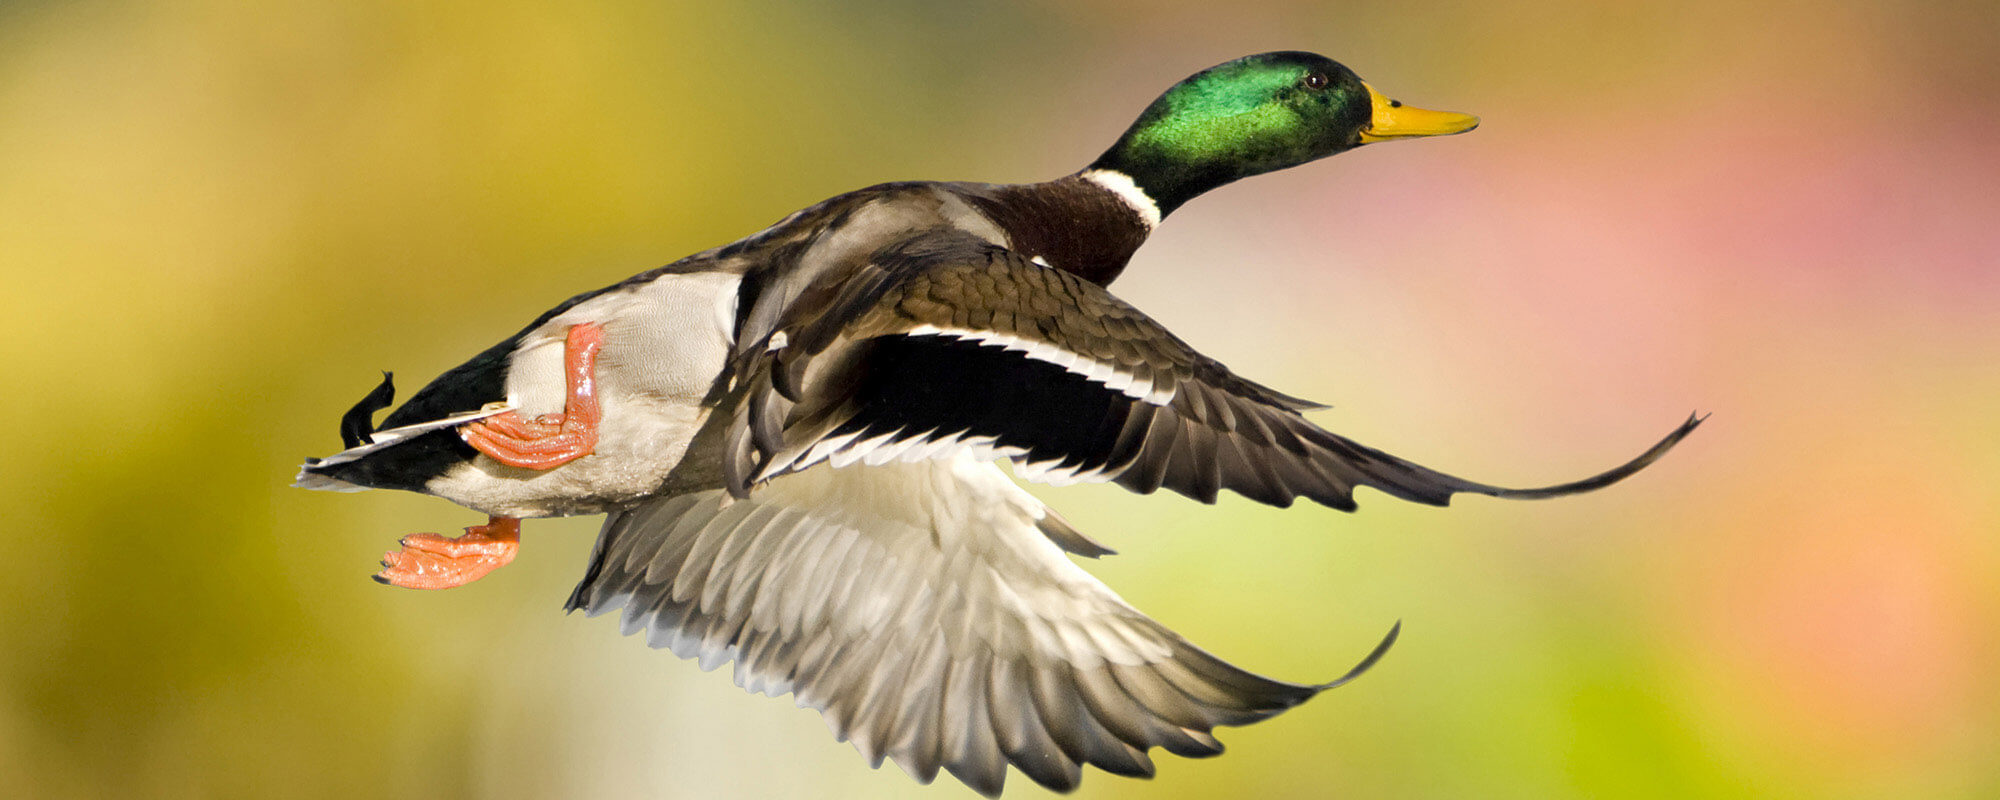 Food Choice Plays Key Role in Attracting Migratory Ducks